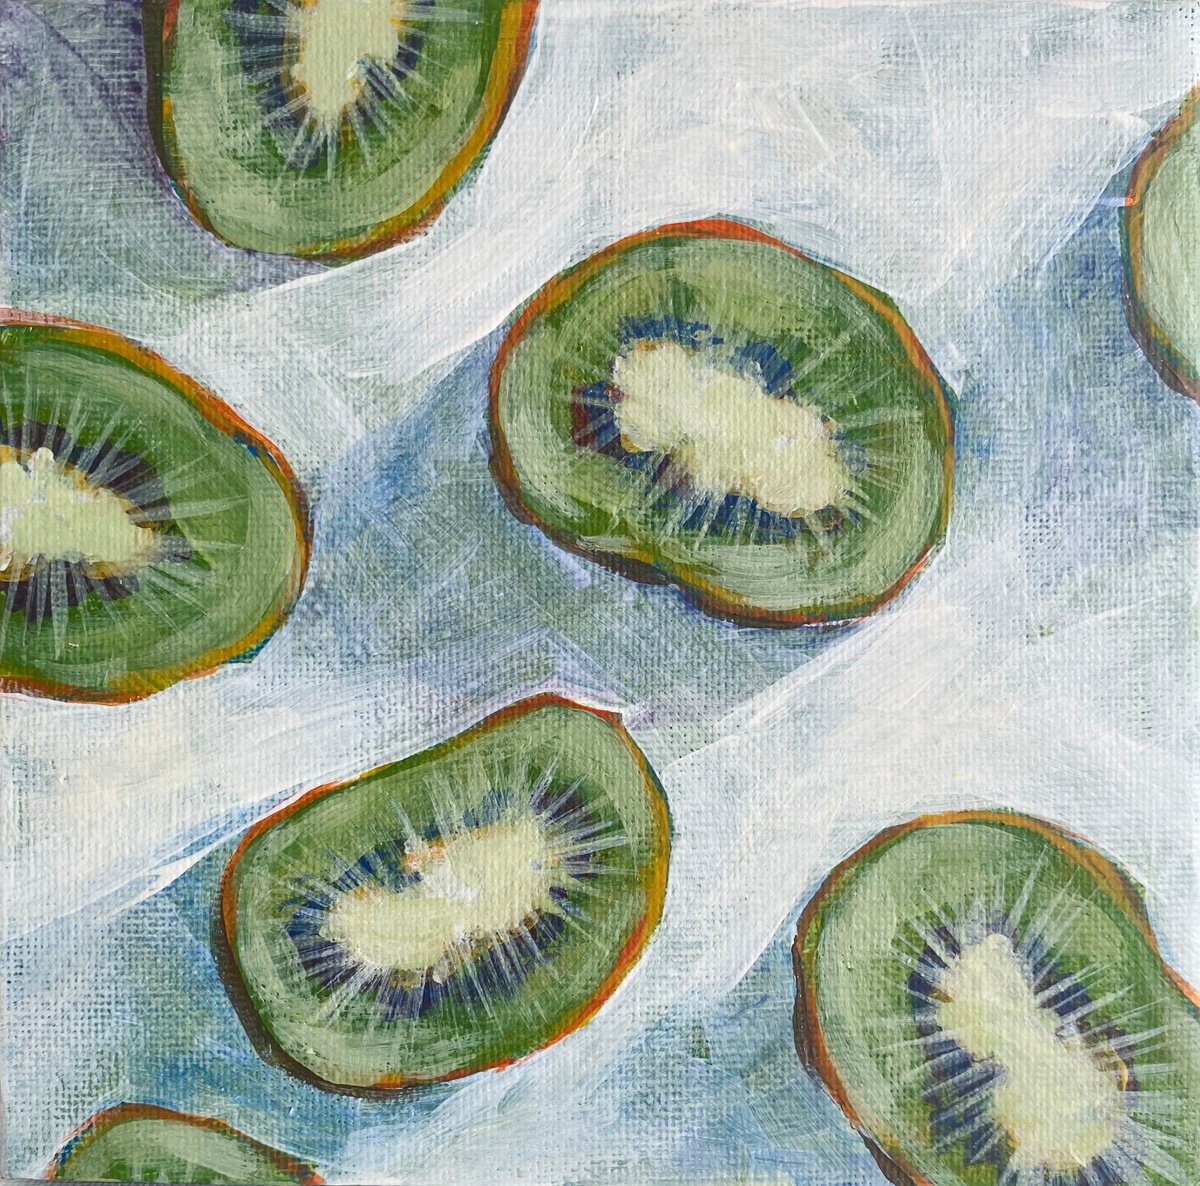 Kiwi. Fruit abstract 3/4 by Anna Speirs